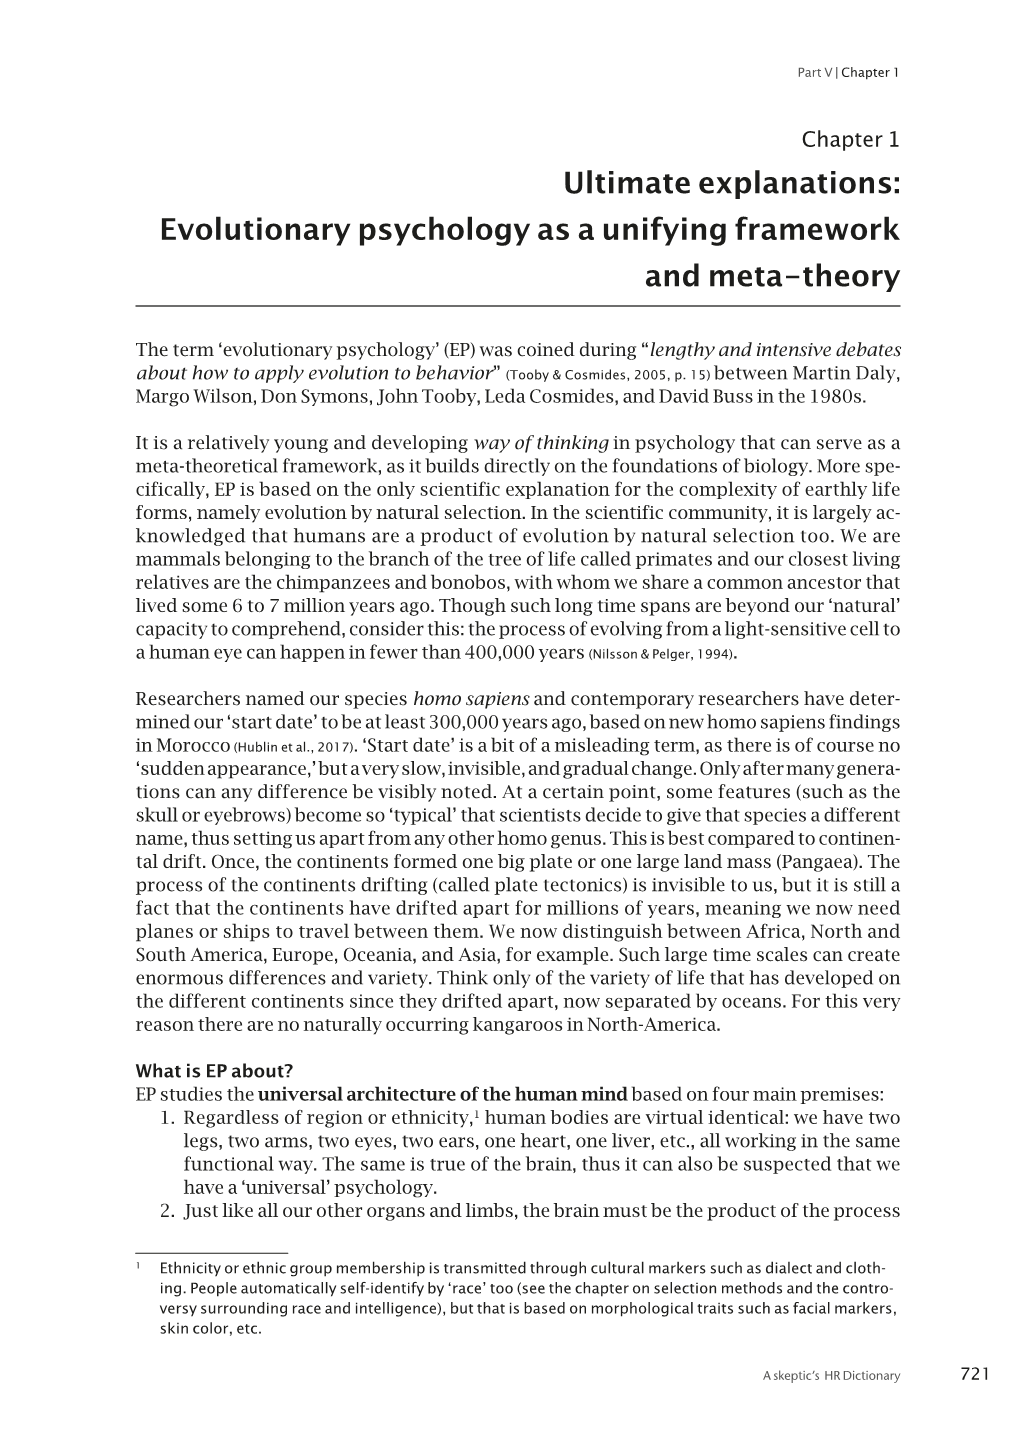 Evolutionary Psychology As a Unifying Framework and Meta-Theory